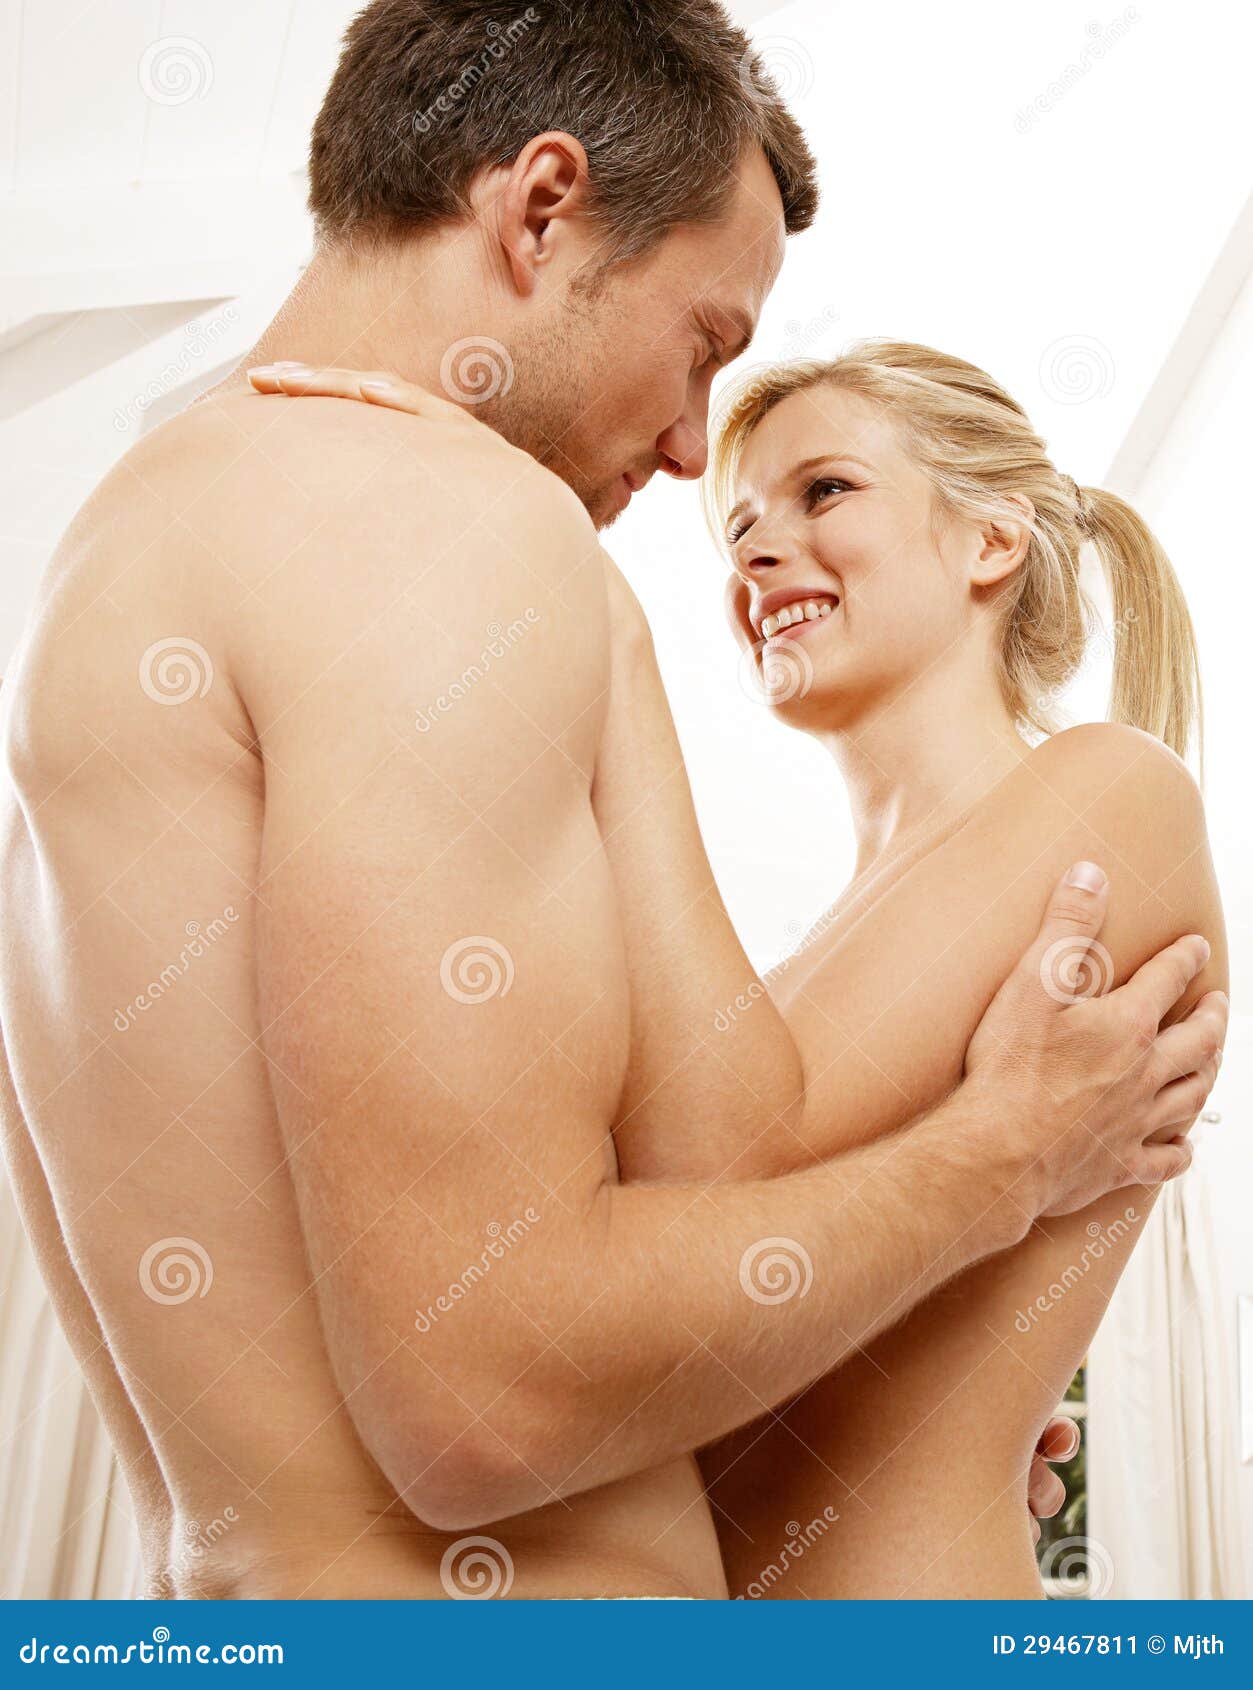 Nude Couple Hugging in Bedroom. Stock Image - Image of close, flawless:  29467811